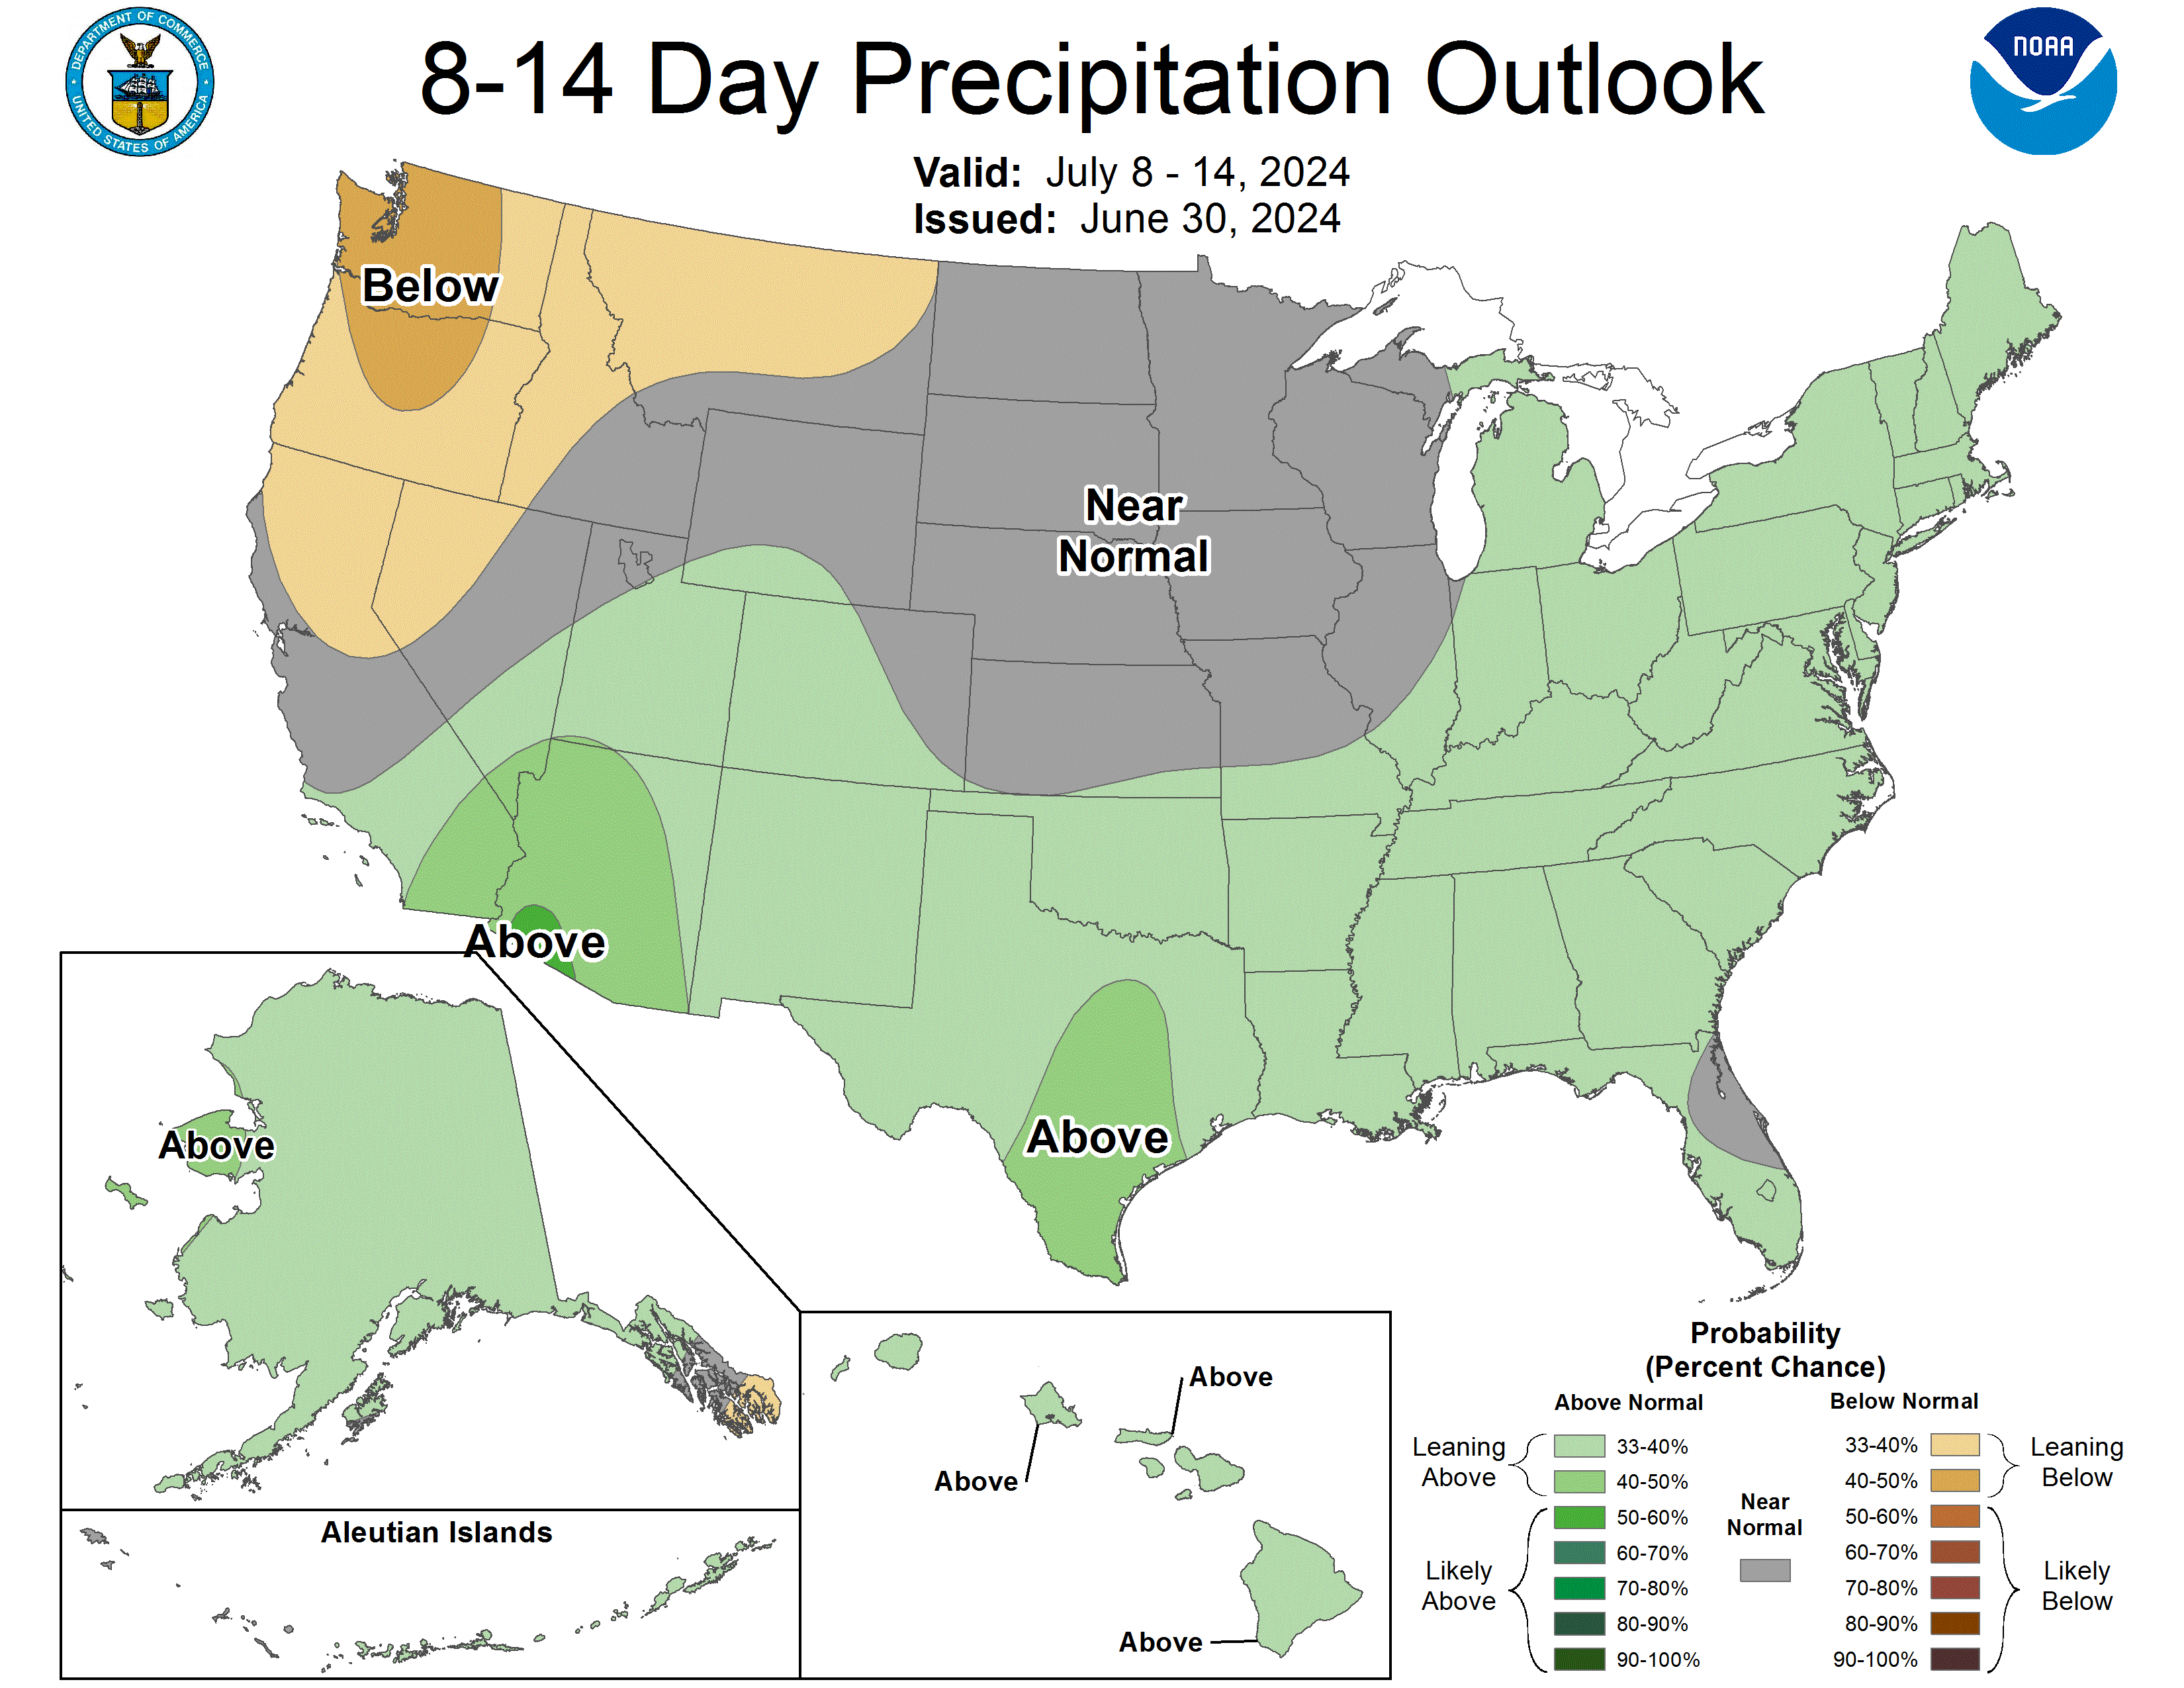 Map showing the precipitation outlook for days 8-14